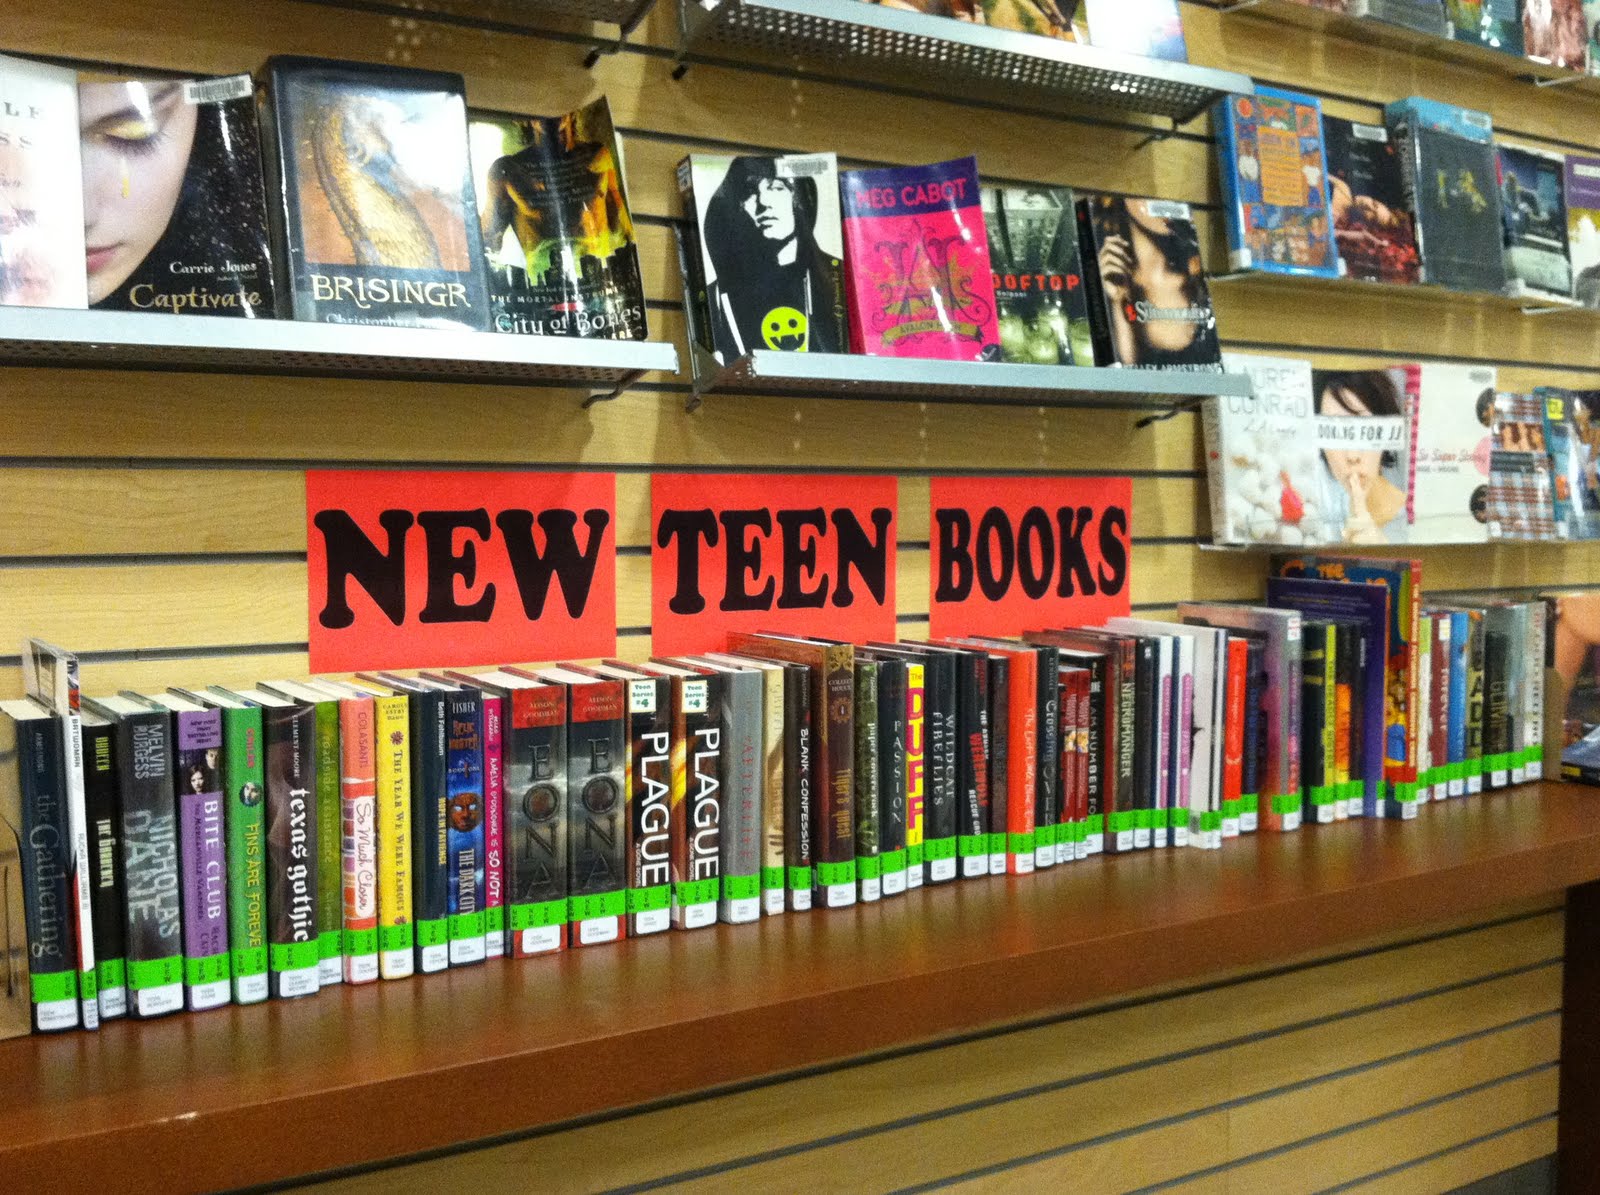 Books for teens. Books have been with us